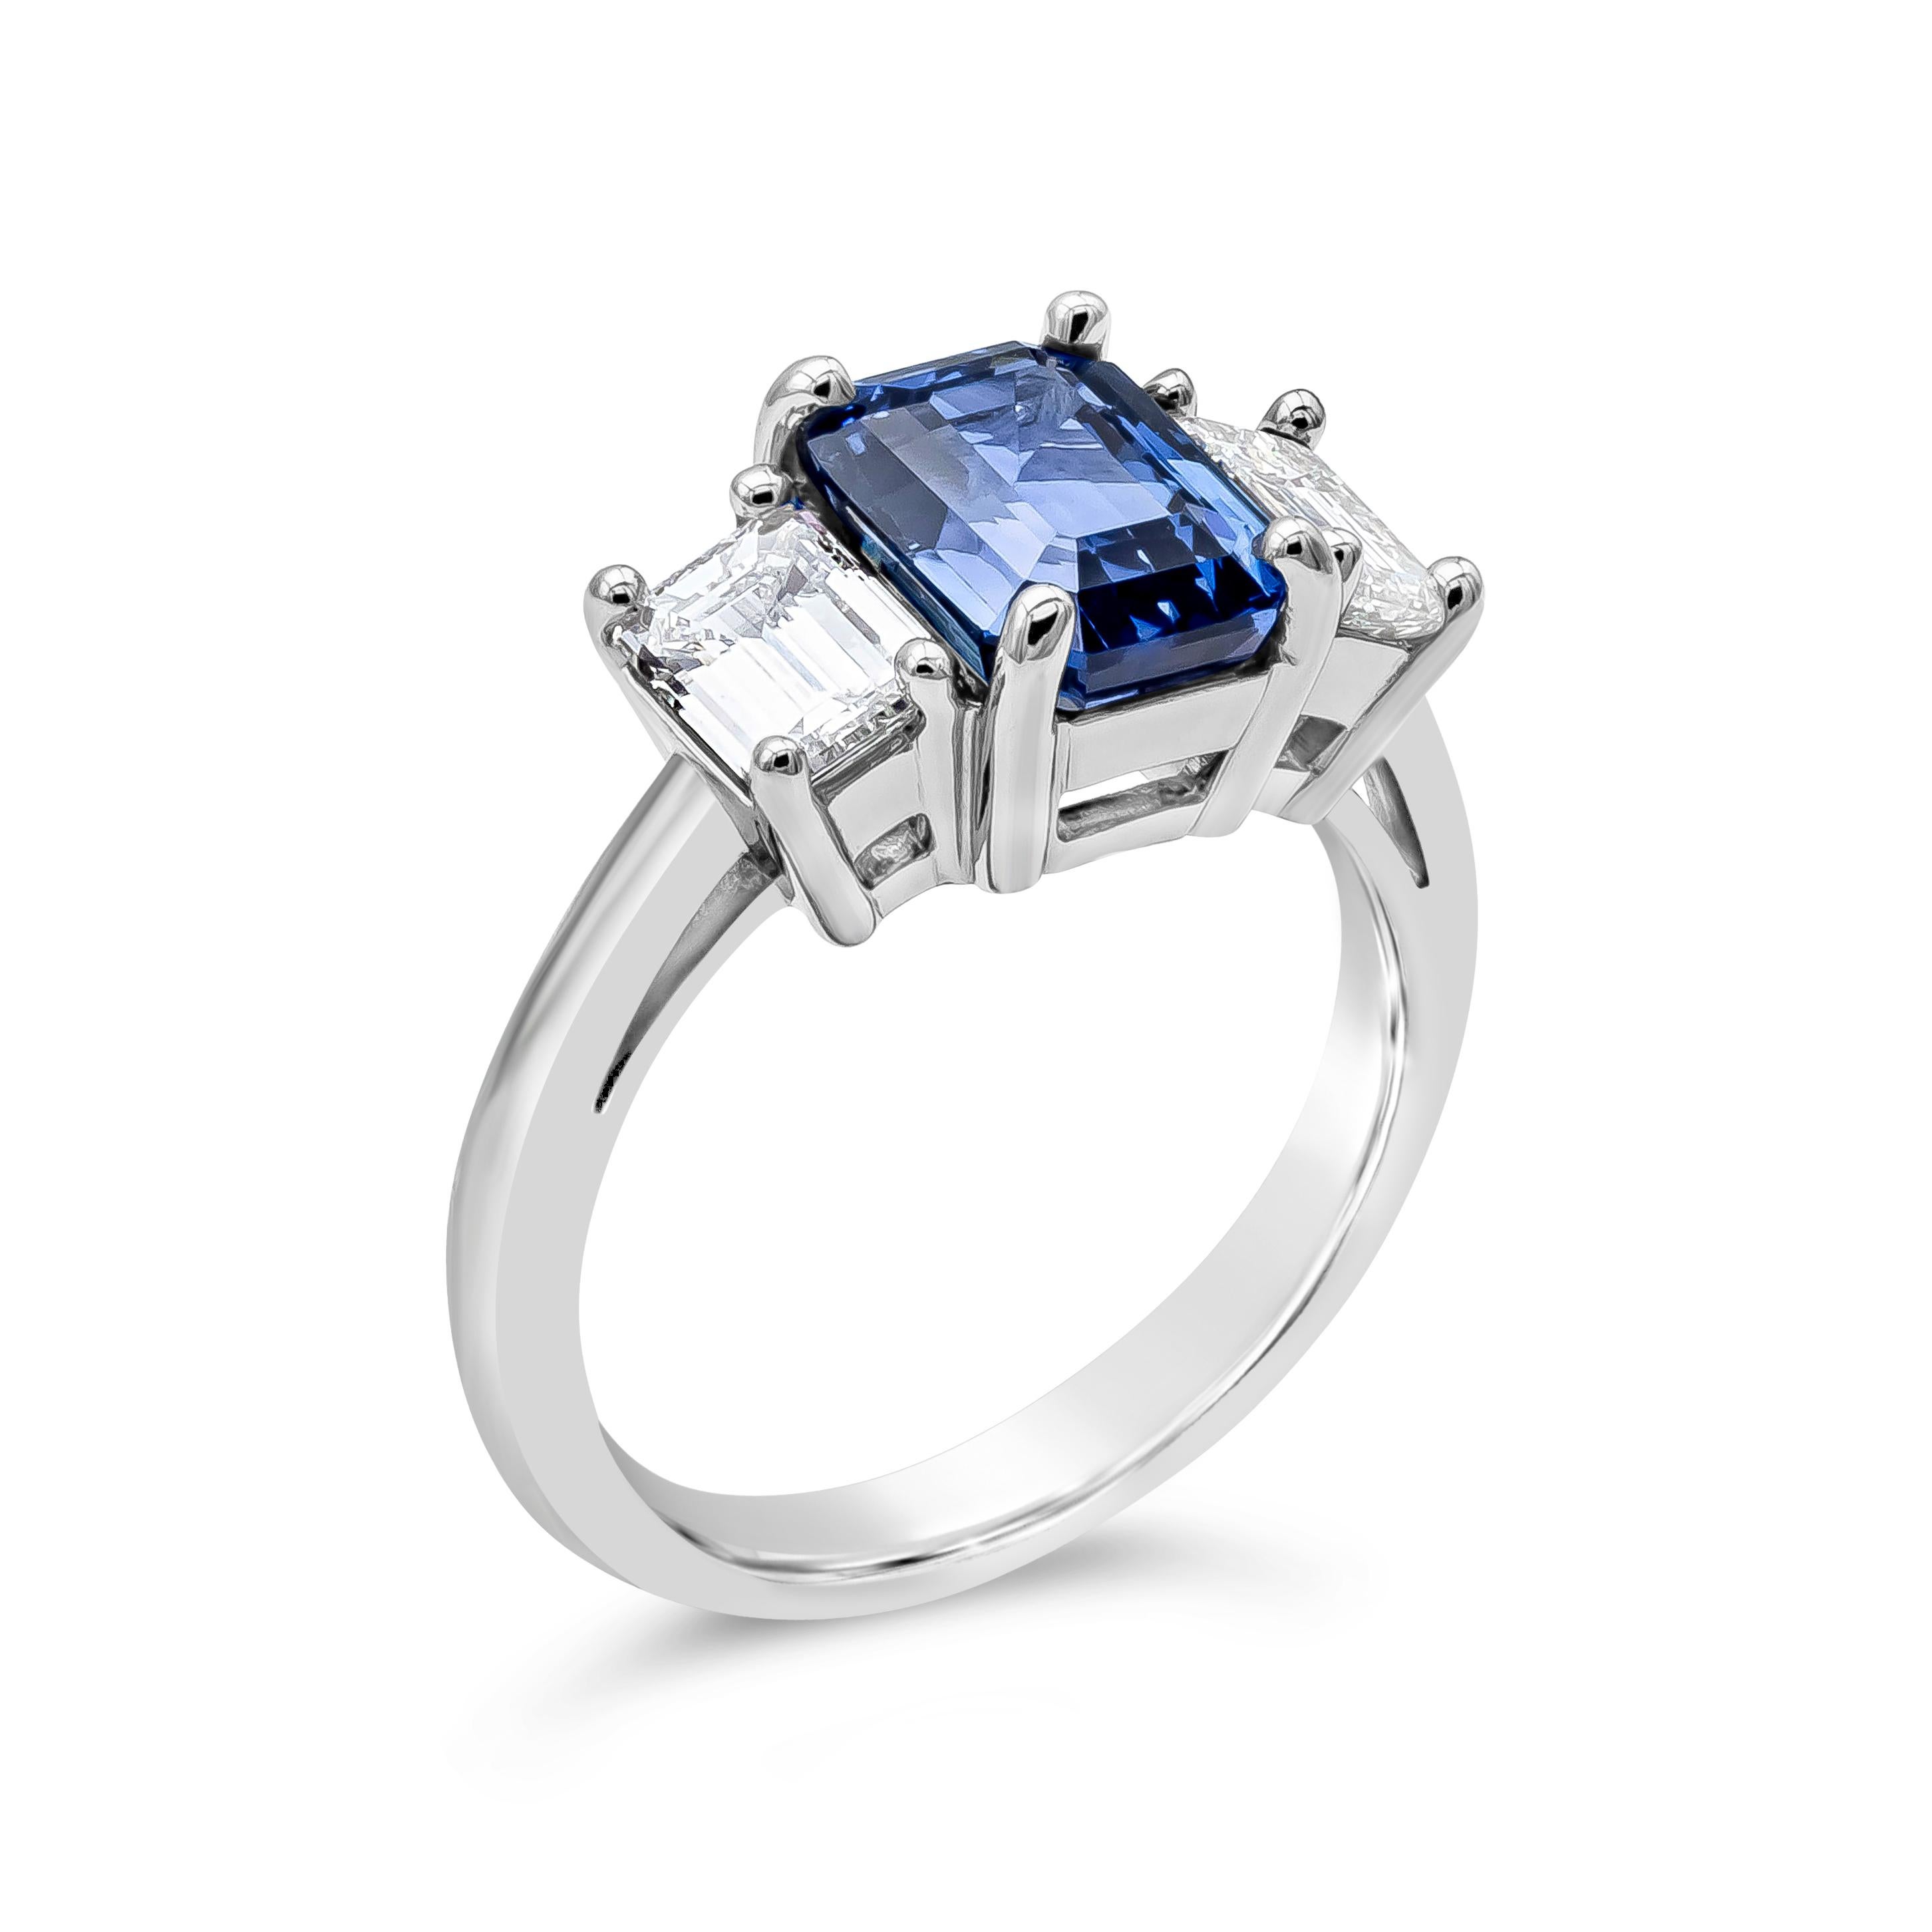 Contemporary GIA Certified 3.25 Carat Emerald Cut Blue Sapphire Three Stone Engagement Ring For Sale